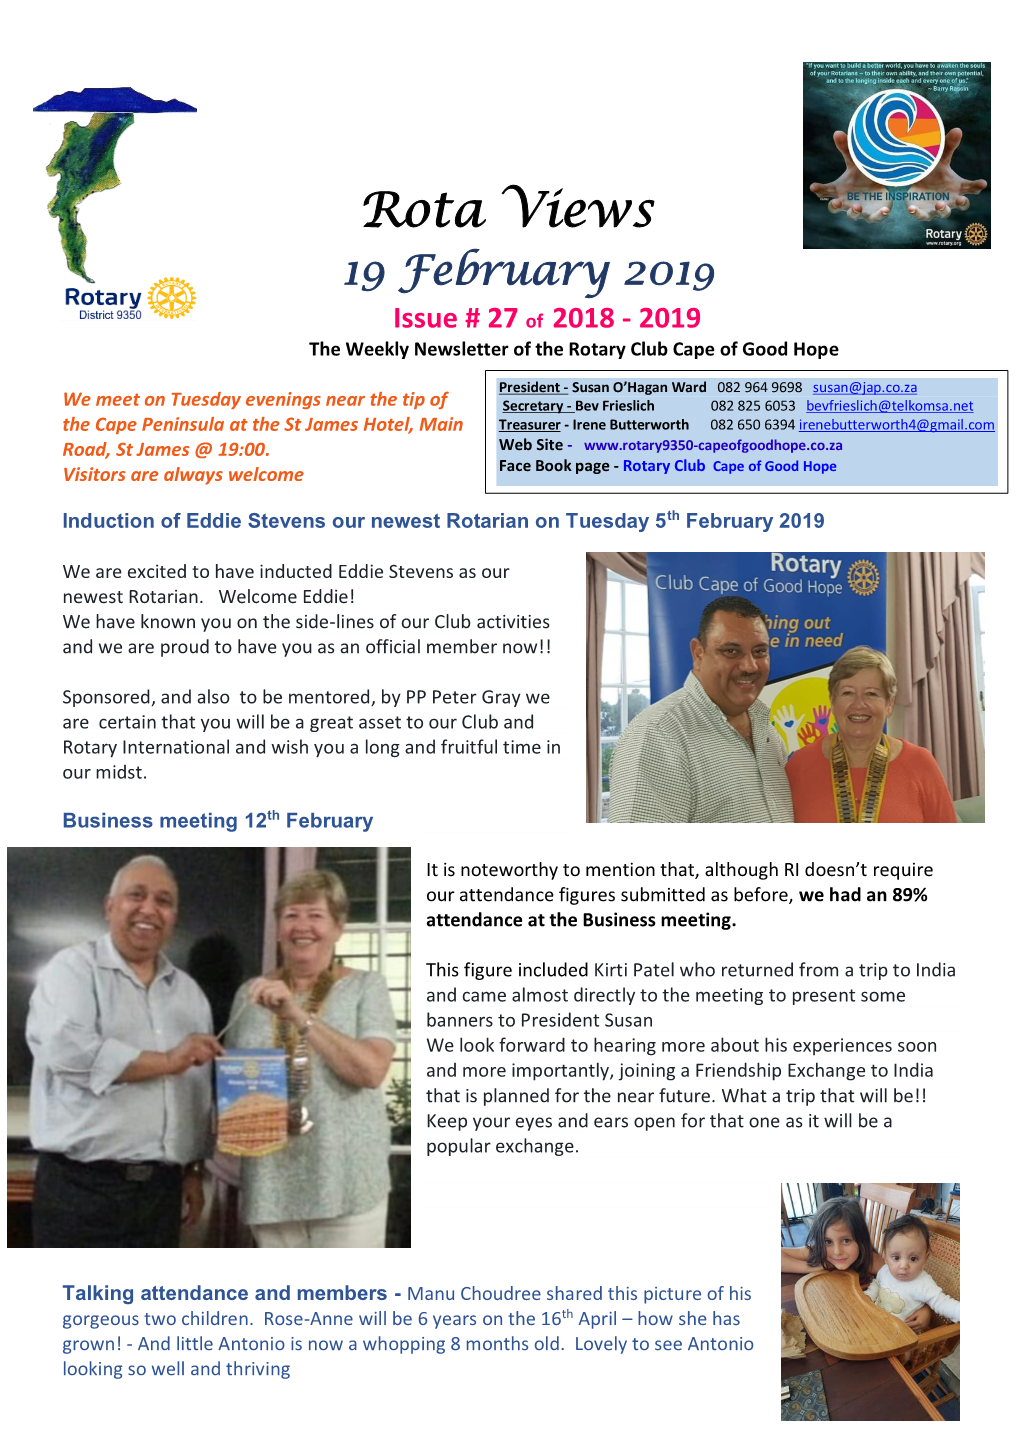 Rota Views 19 February 2019 Issue # 27 of 2018 - 2019 the Weekly Newsletter of the Rotary Club Cape of Good Hope